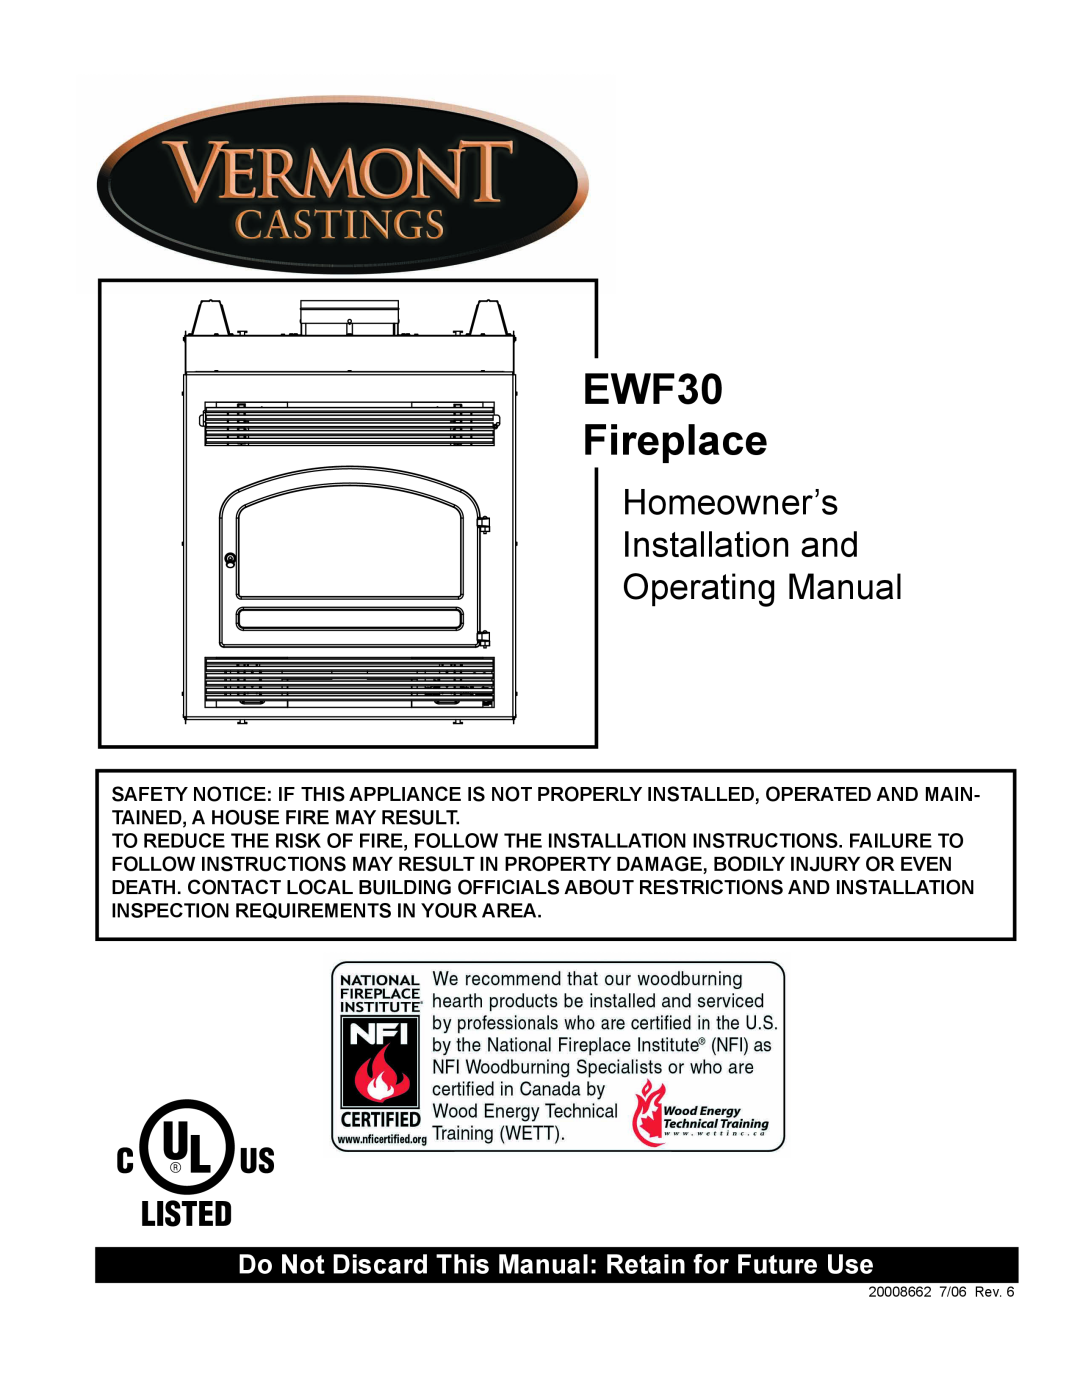 Vermont Casting installation instructions EWF30 Fireplace, Homeowner’s Installation and Operating Manual 